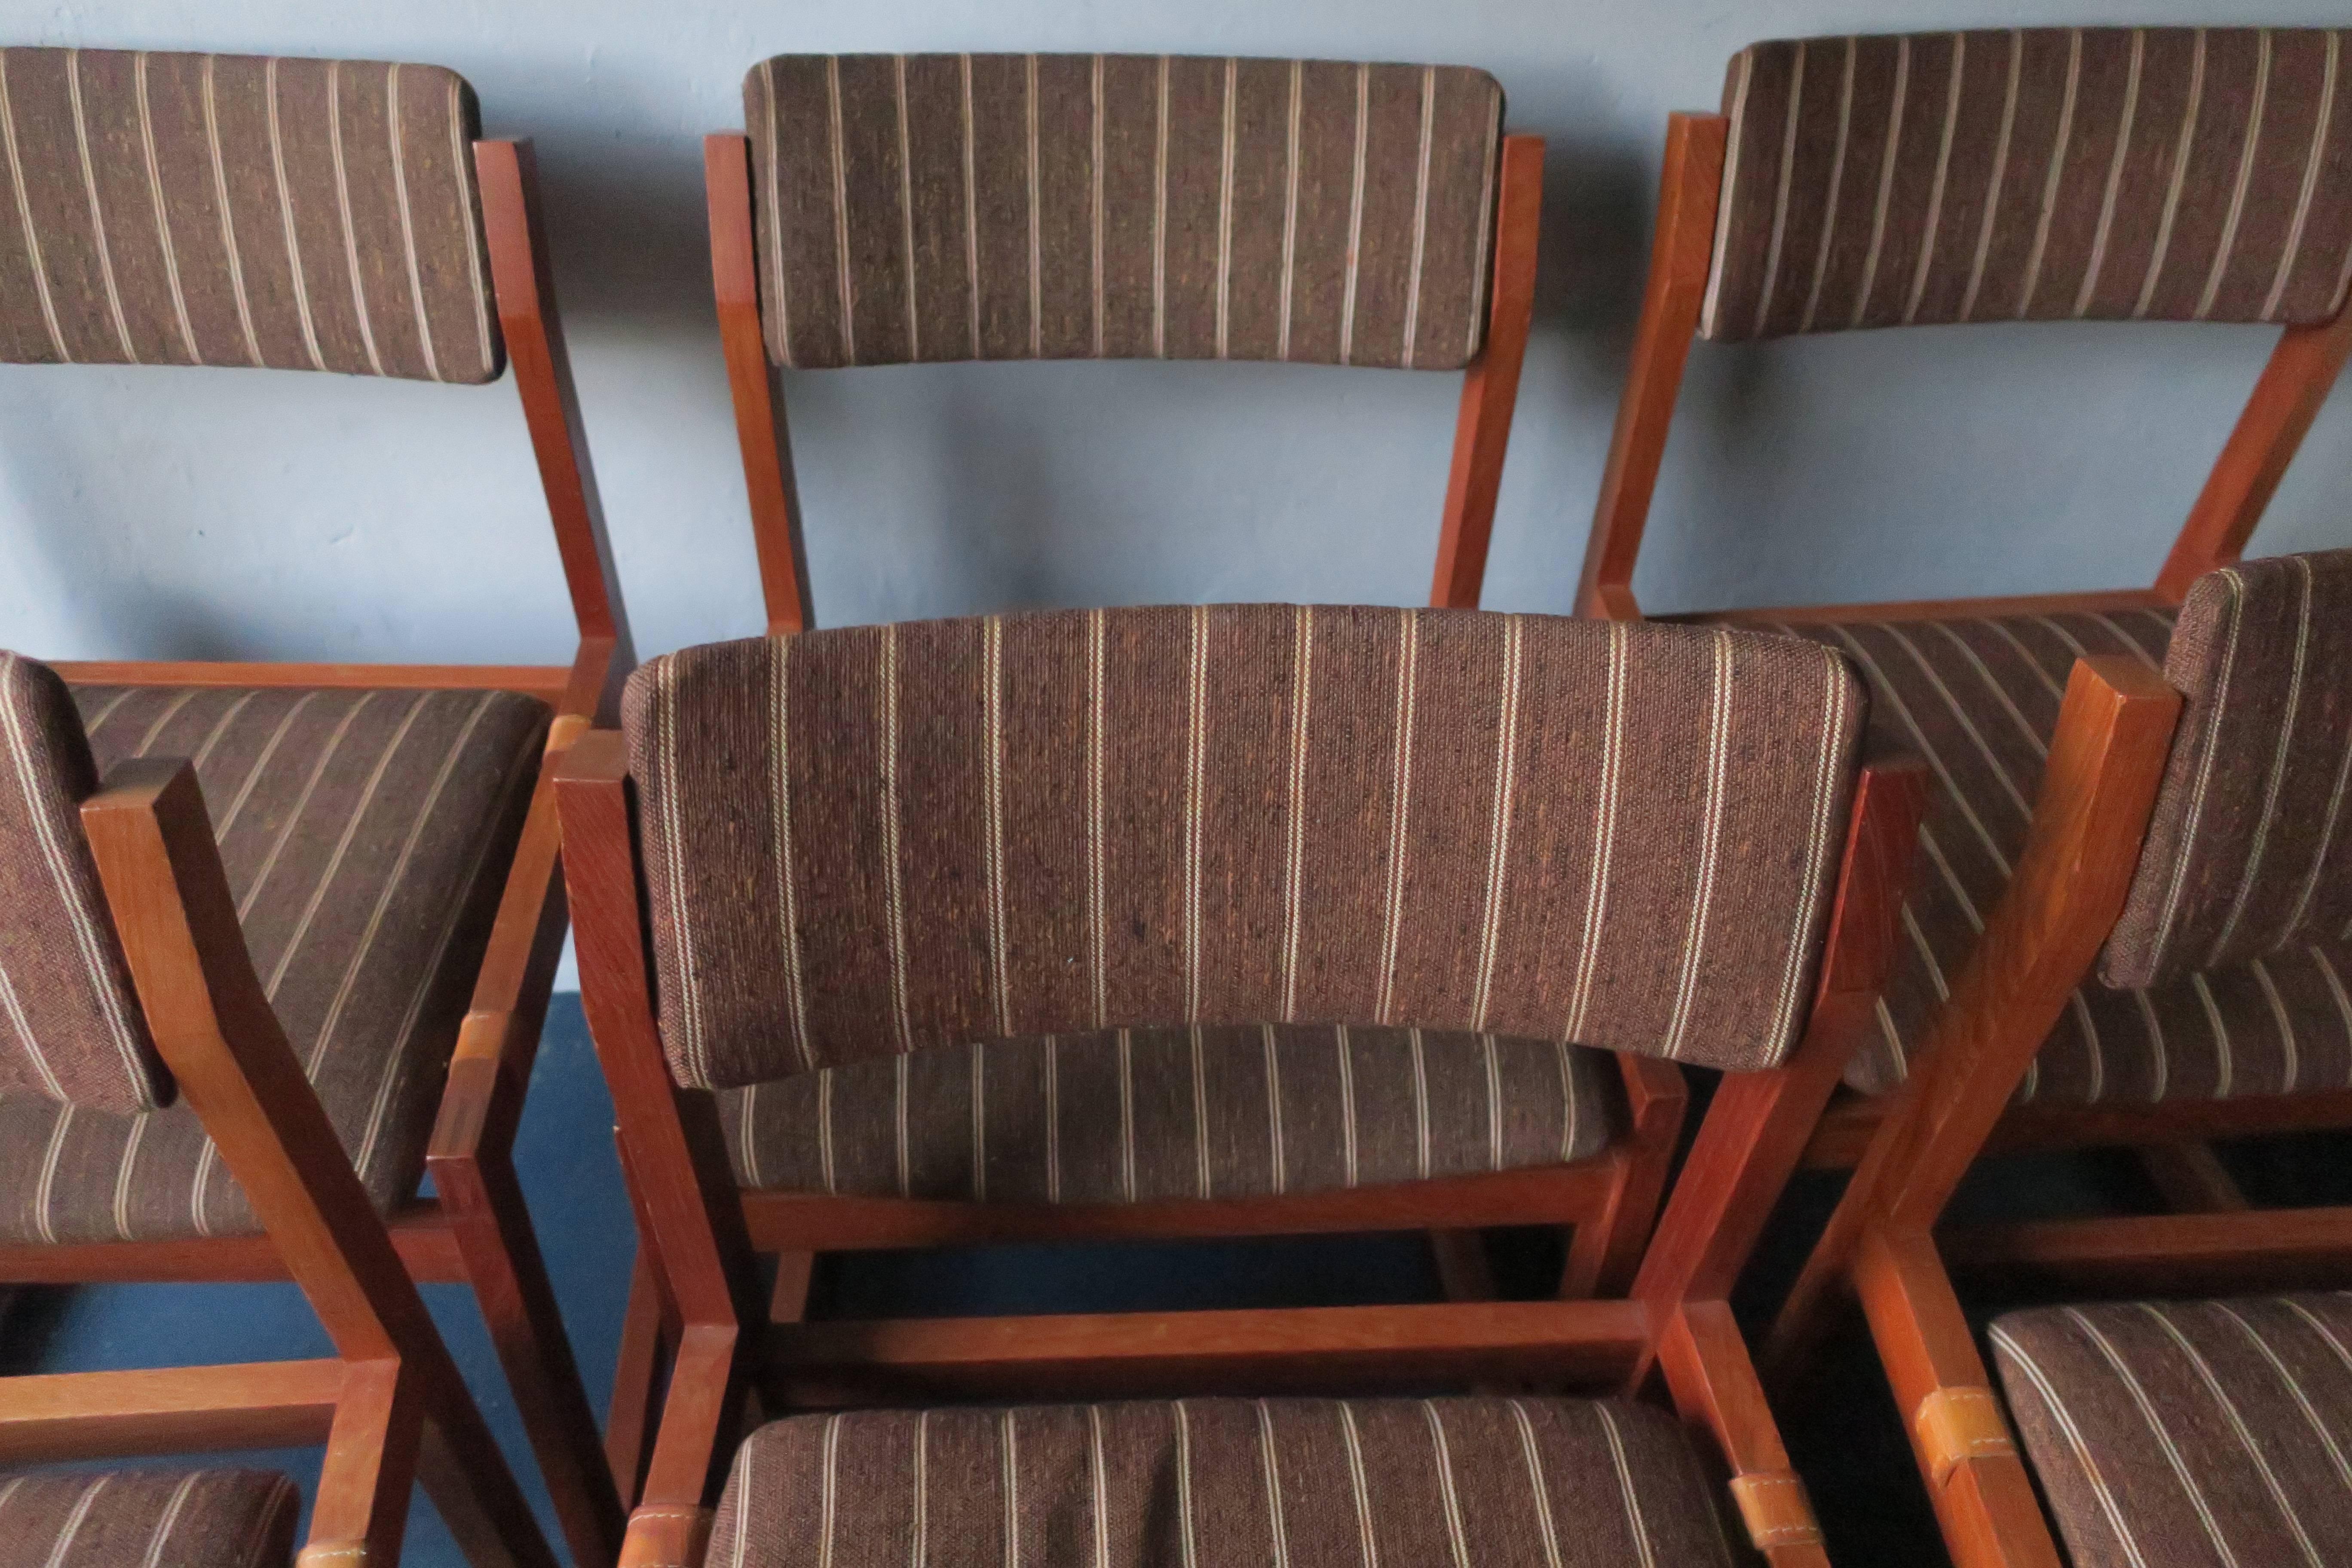 Set of six Danish Korup Stolefabrik dining room chairs in teak.
Square shape, very unusual design.
Unusual feature: the seats slung on leather straps.
Original striped covers in very good condition.